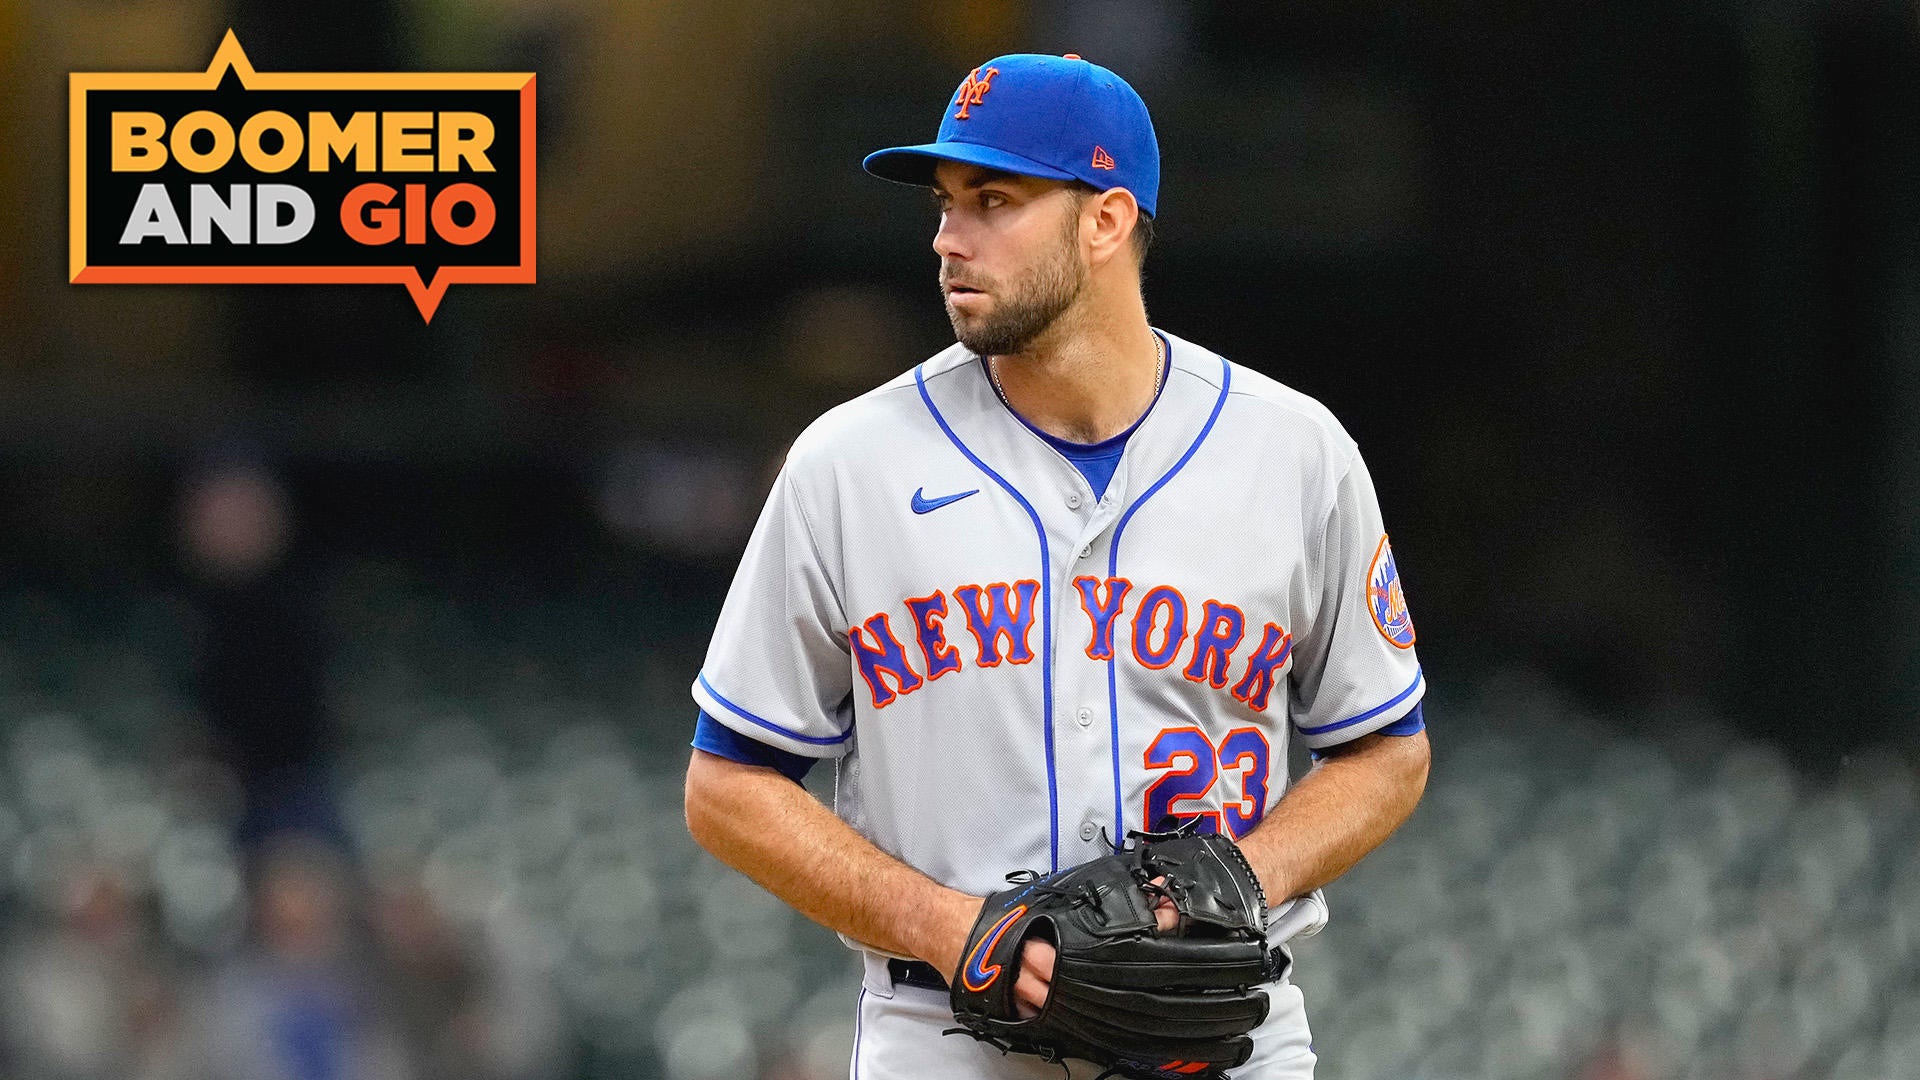 Boomer and Gio: Ron Darling on the Mets' Lackluster Start 